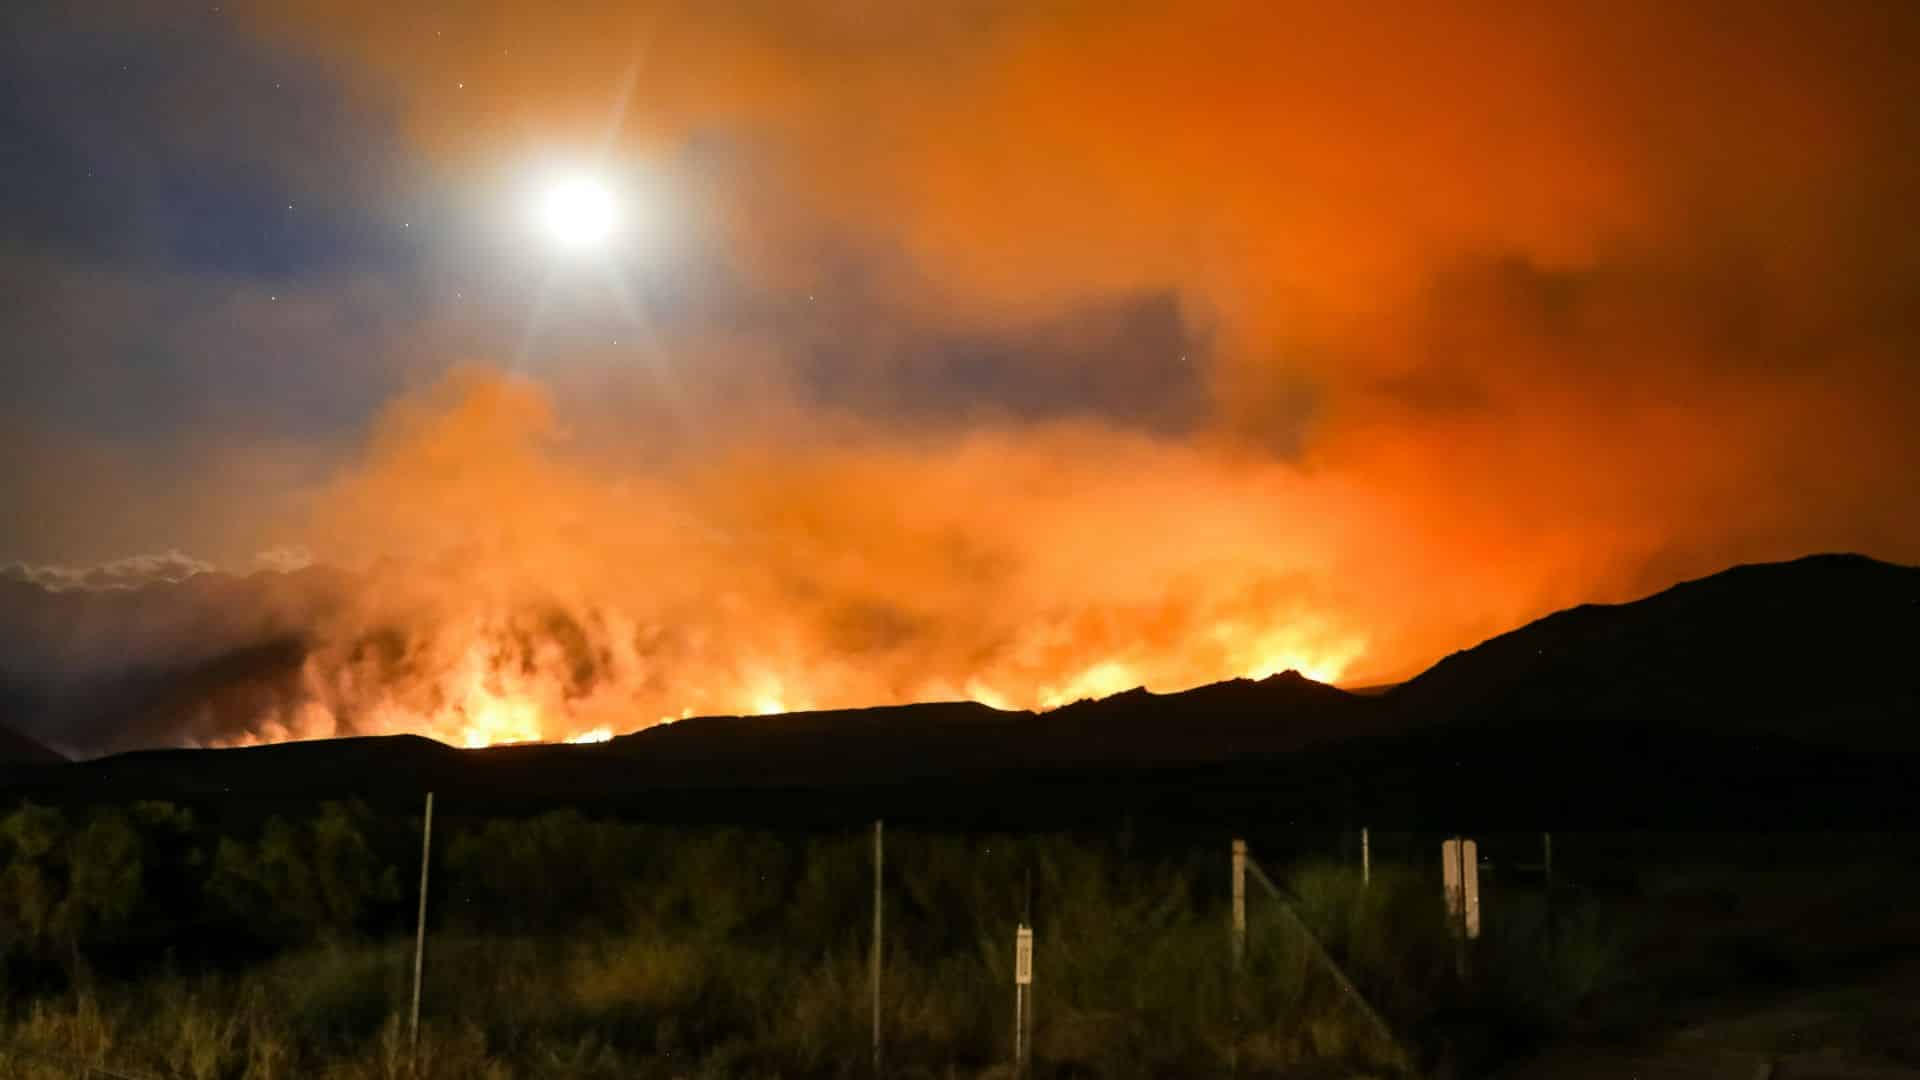 An emotional testimonial from California wildfires victim